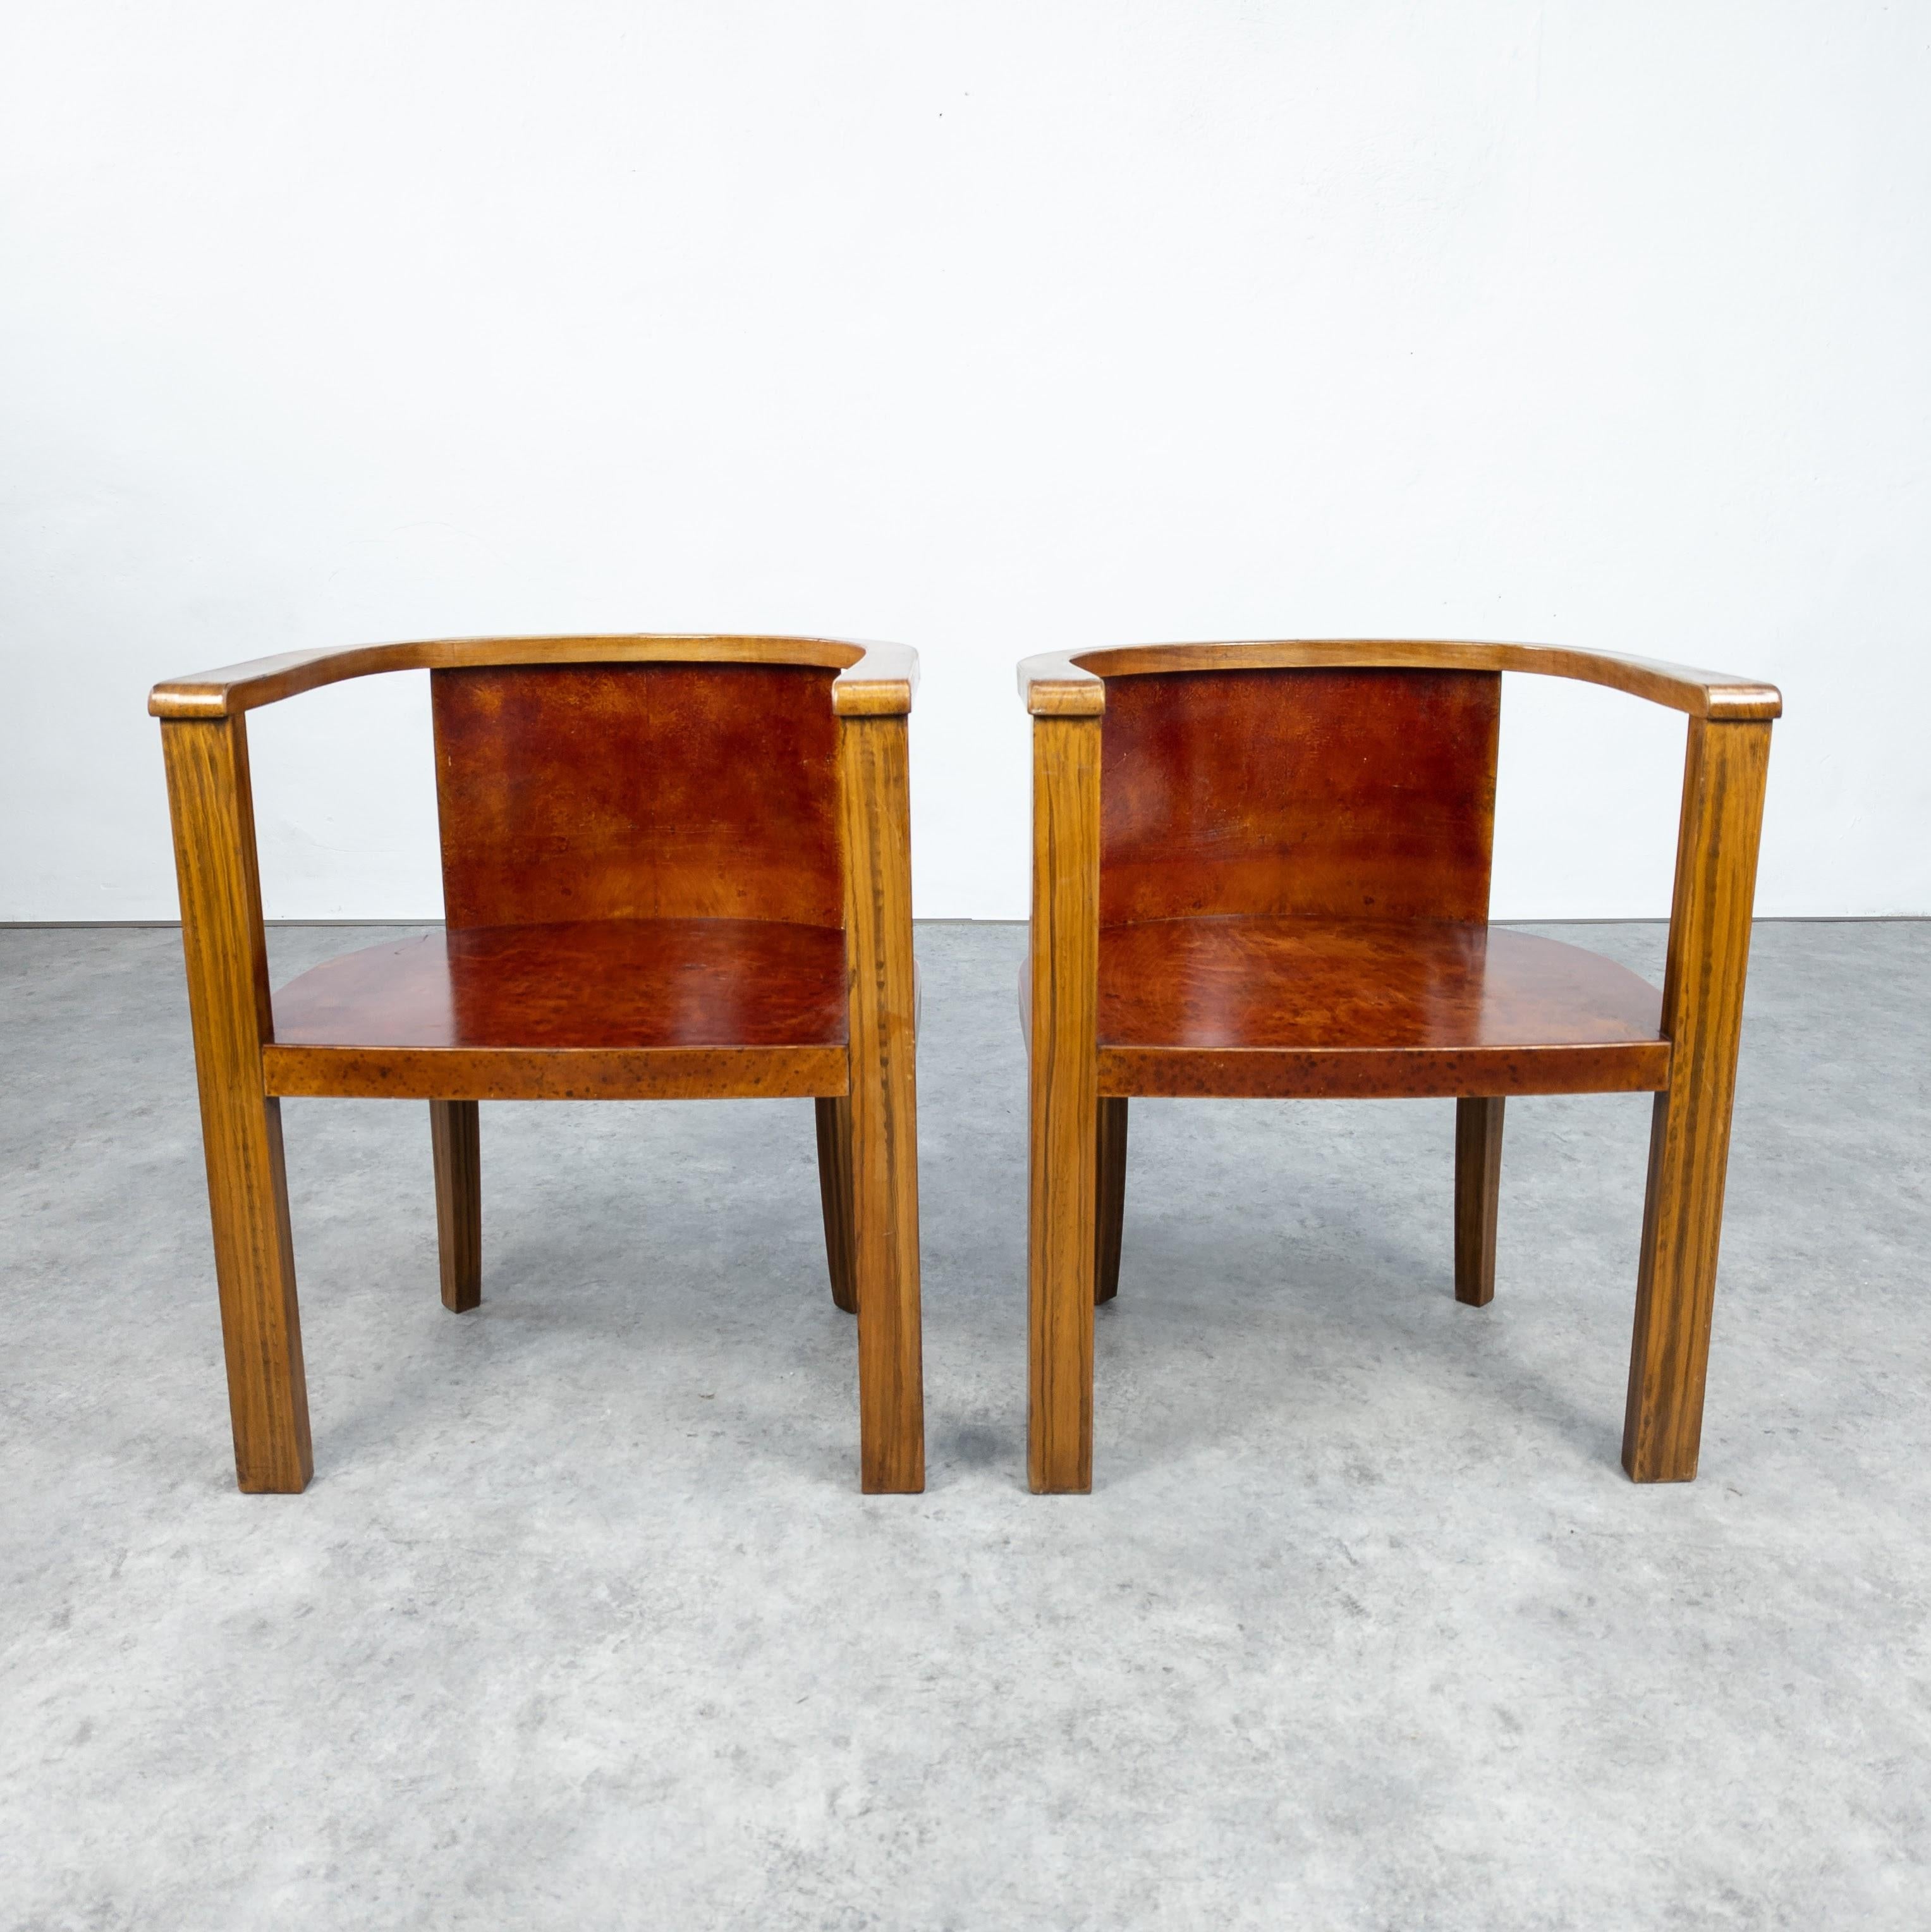 Pair of beautiful wooden barrel chairs manufactured in Germany in 1930's. Made of solid beech and walnut veneer. In very good original condition with beautiful patina. Structurally sound. Wood expertly cleaned. Measures: Height 70 cm, seat height 40